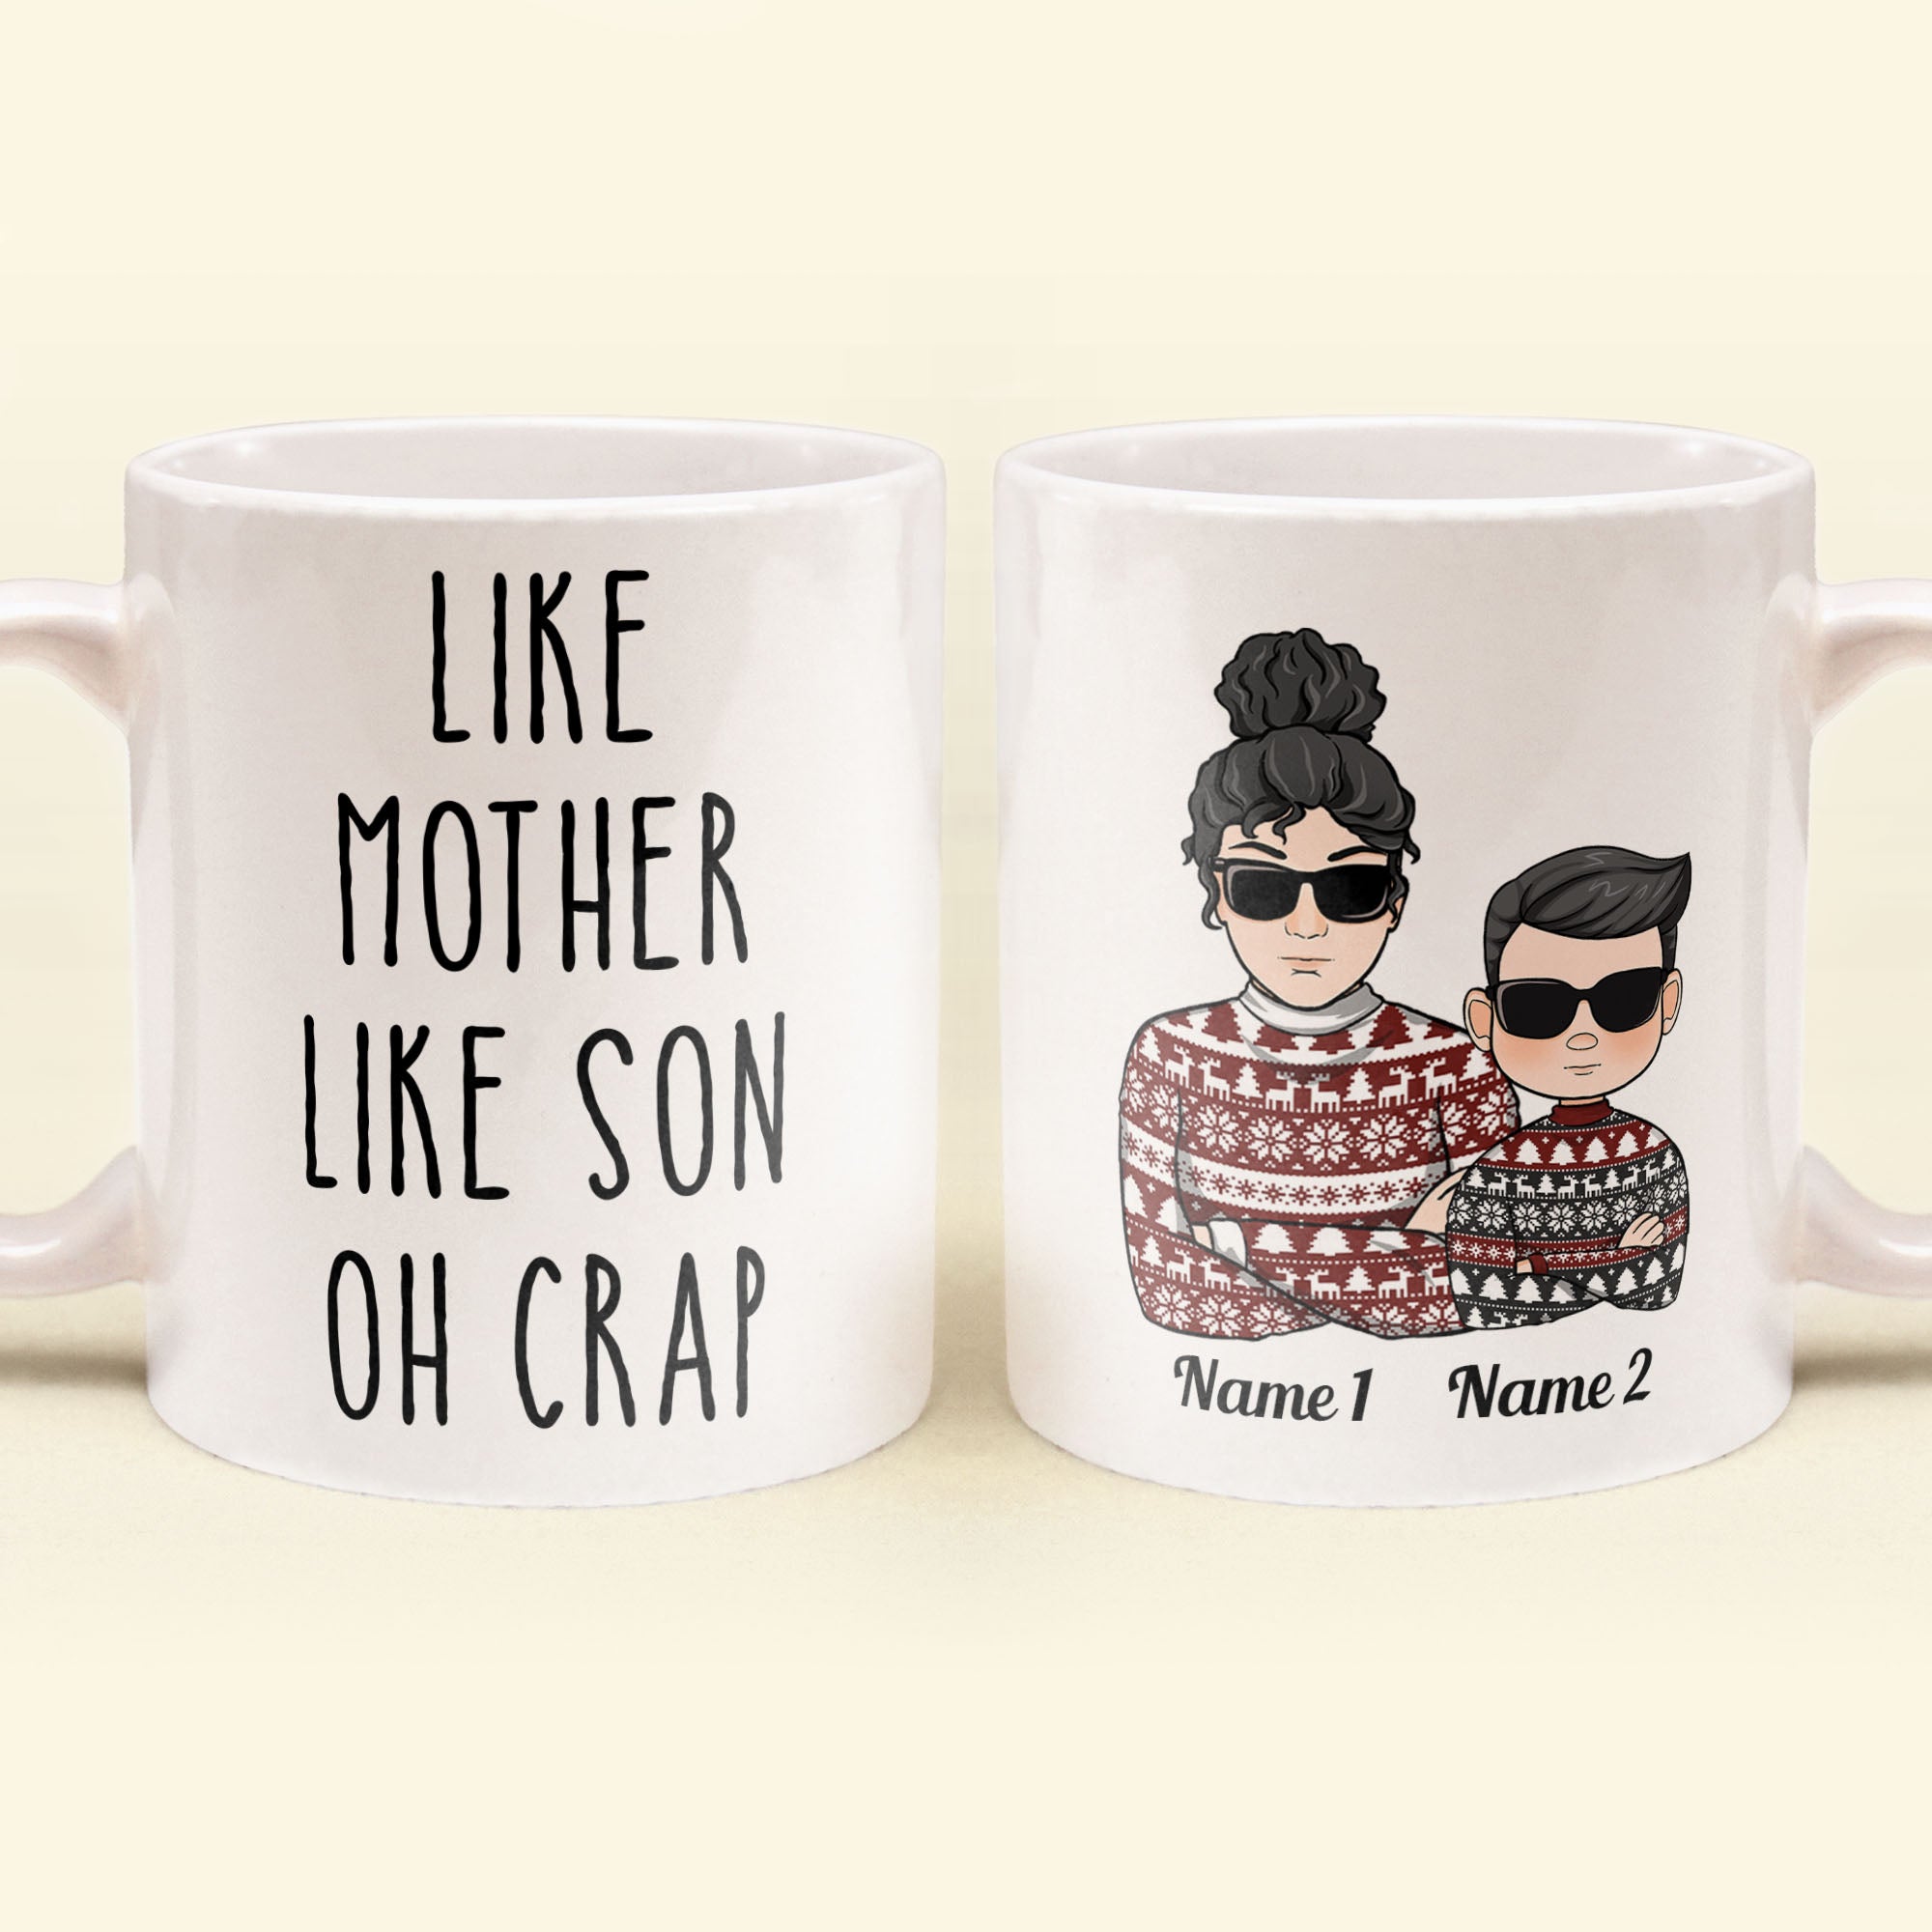 http://macorner.co/cdn/shop/products/Like-Father-Like-Daughter-Oh-Crap-Personalized-Mug-Christmas-Gift-For-Fathers_-Mothers_-Grandpas_-Grandmas_-Sons-_-Daughters_1_2312feeb-b4dd-4a43-9a54-52b876e8161f.jpg?v=1636364693